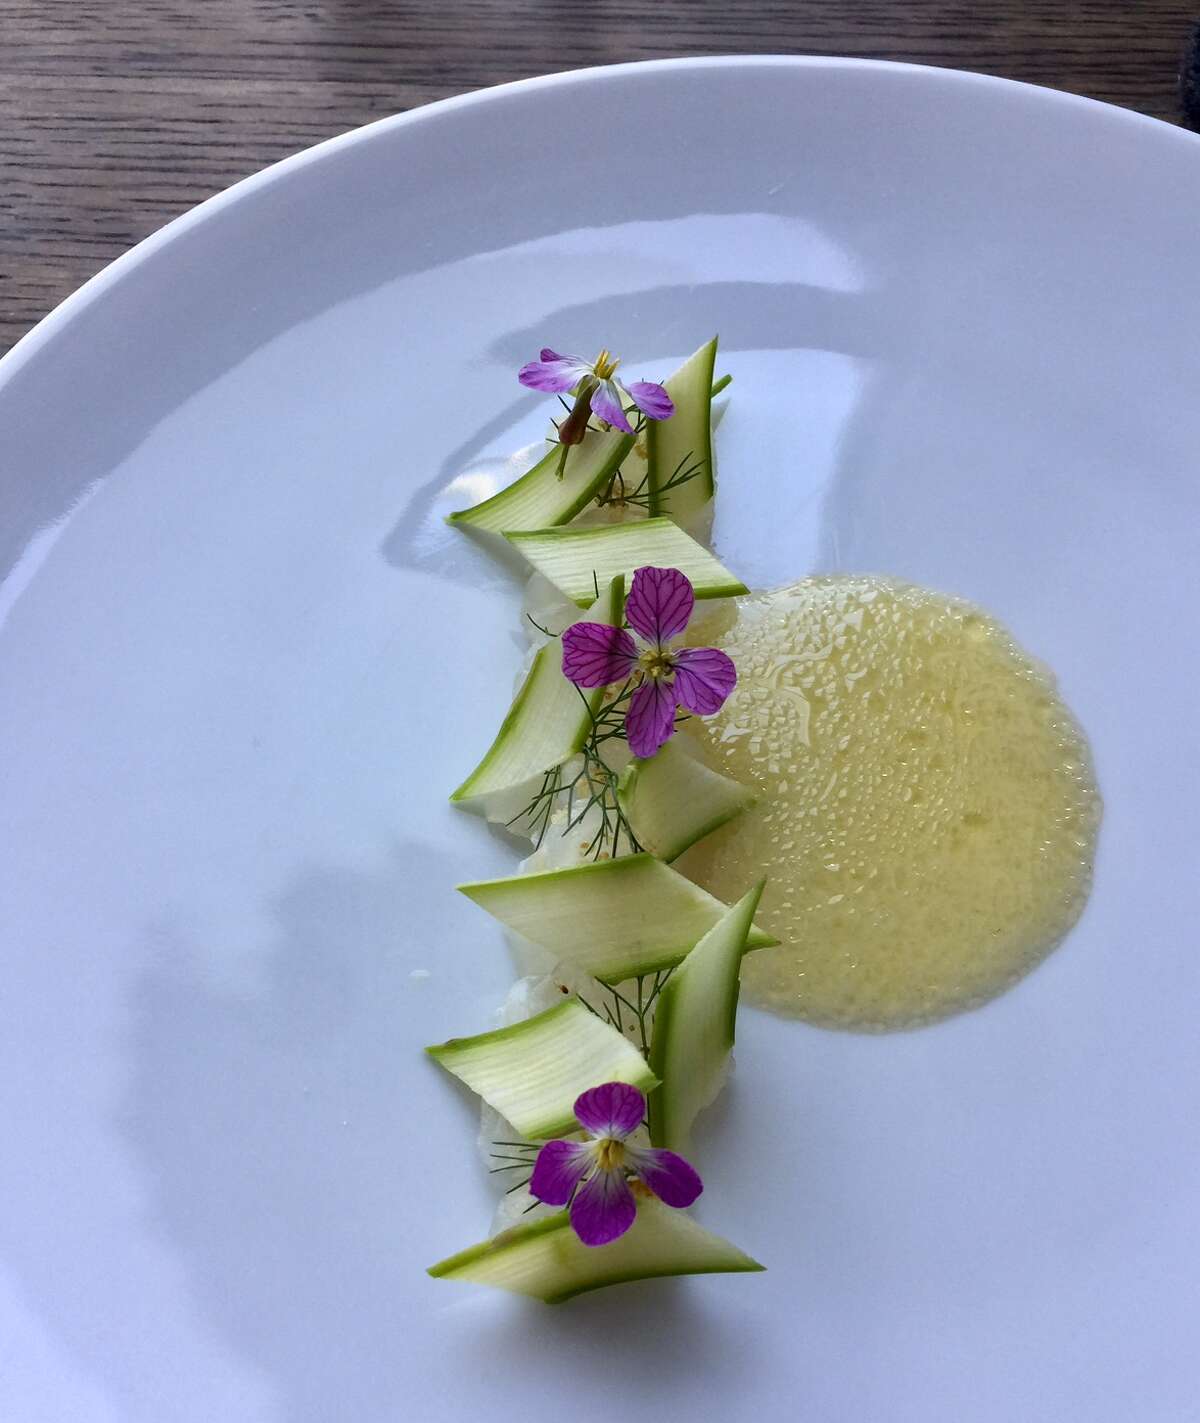 Commis, Oakland: One of the 12-courses on the $149 menu features salted spring flounder with bay laurel blossoms and elderflower vinegar and safflower